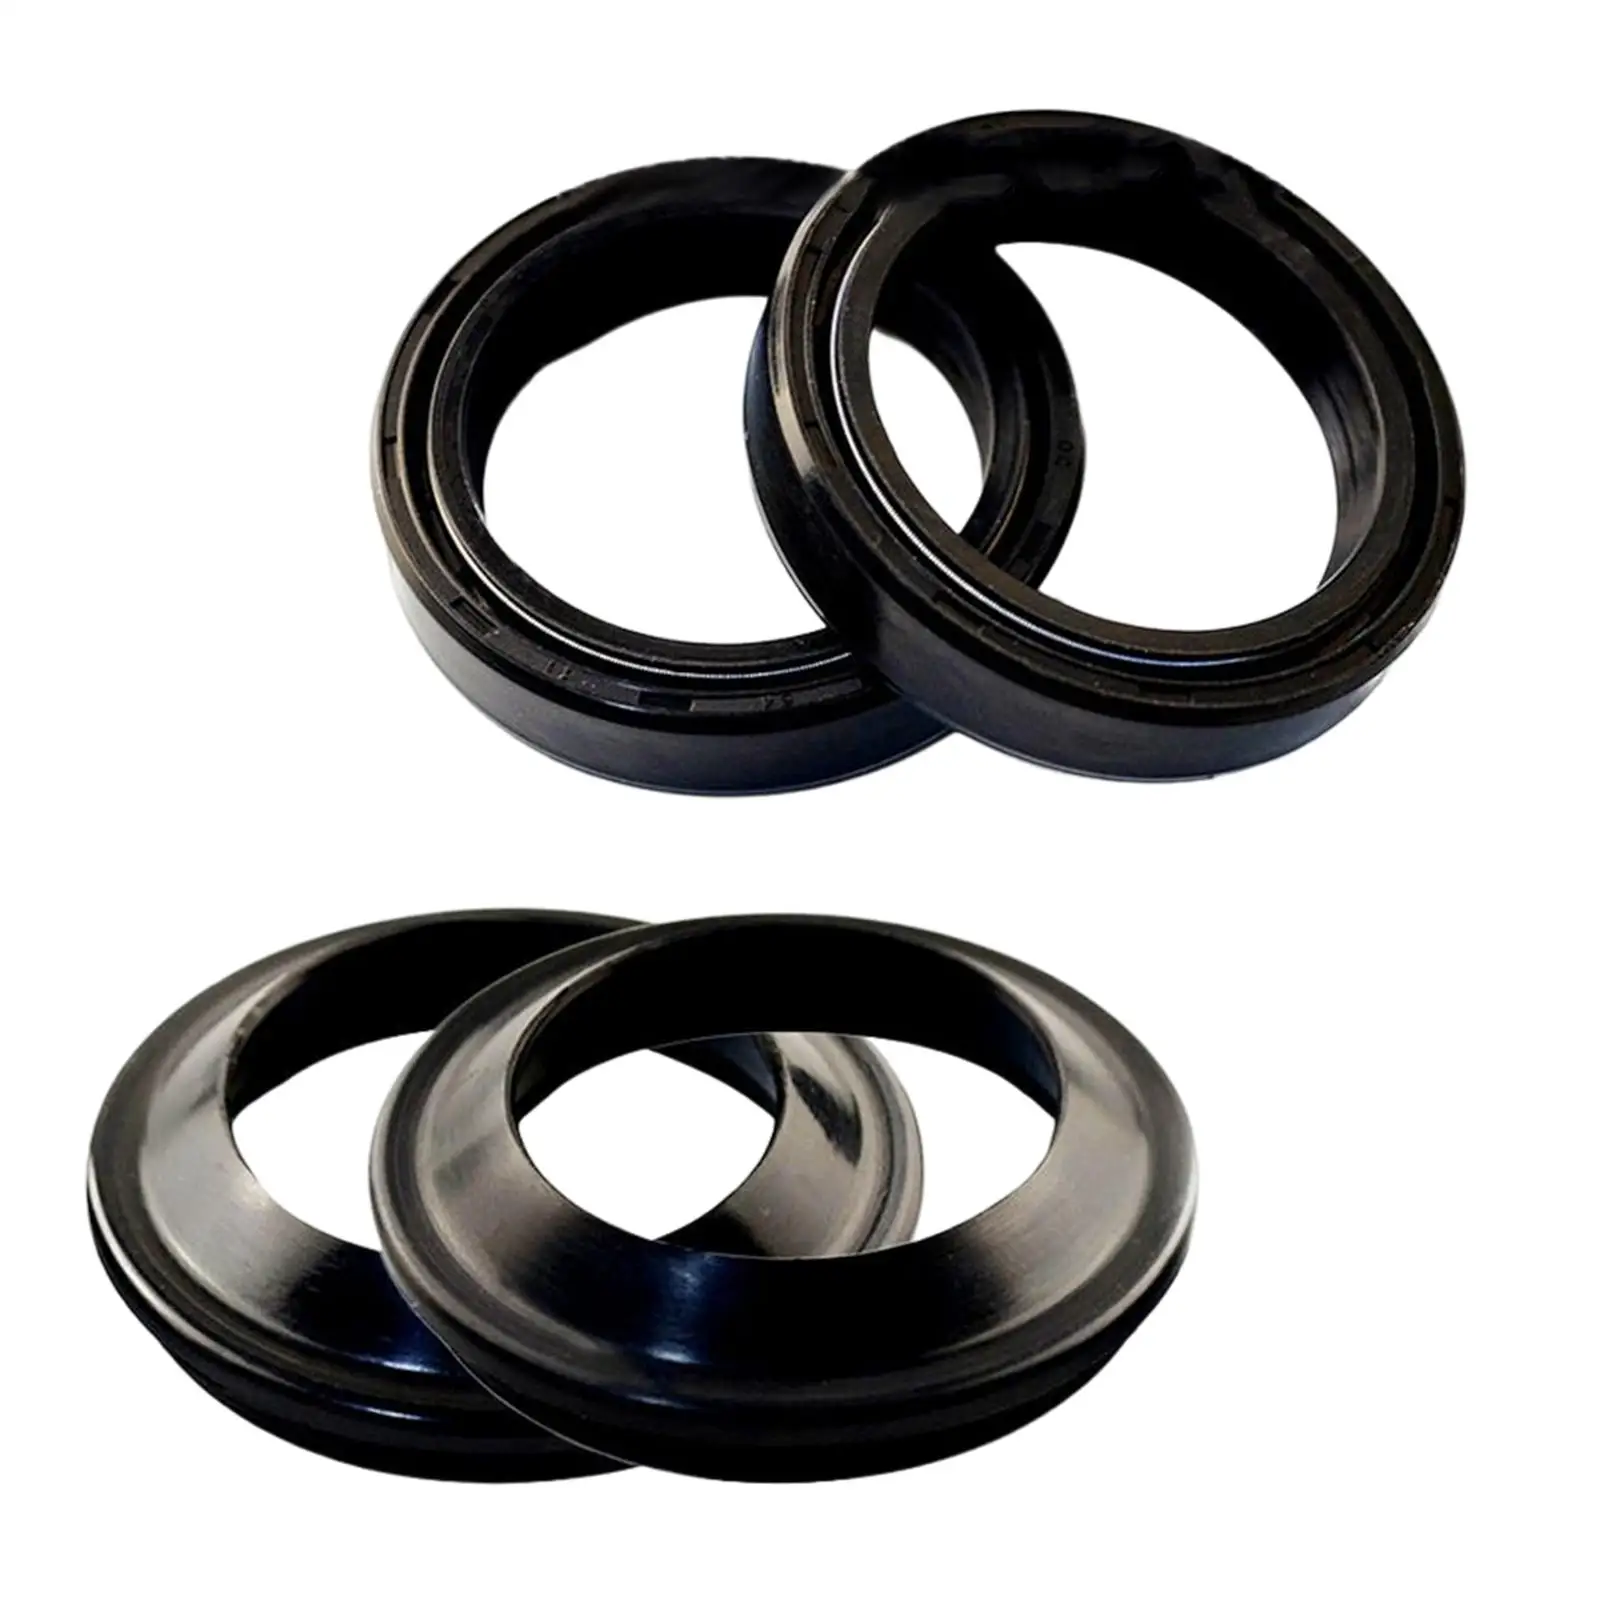 Motorcycle Fork Seal and Dust Seal Kit Rubber 48x61x11mm for Yamaha Fjr1300 Fjr1300A Xvs650 Fjr1300AE Replace Parts